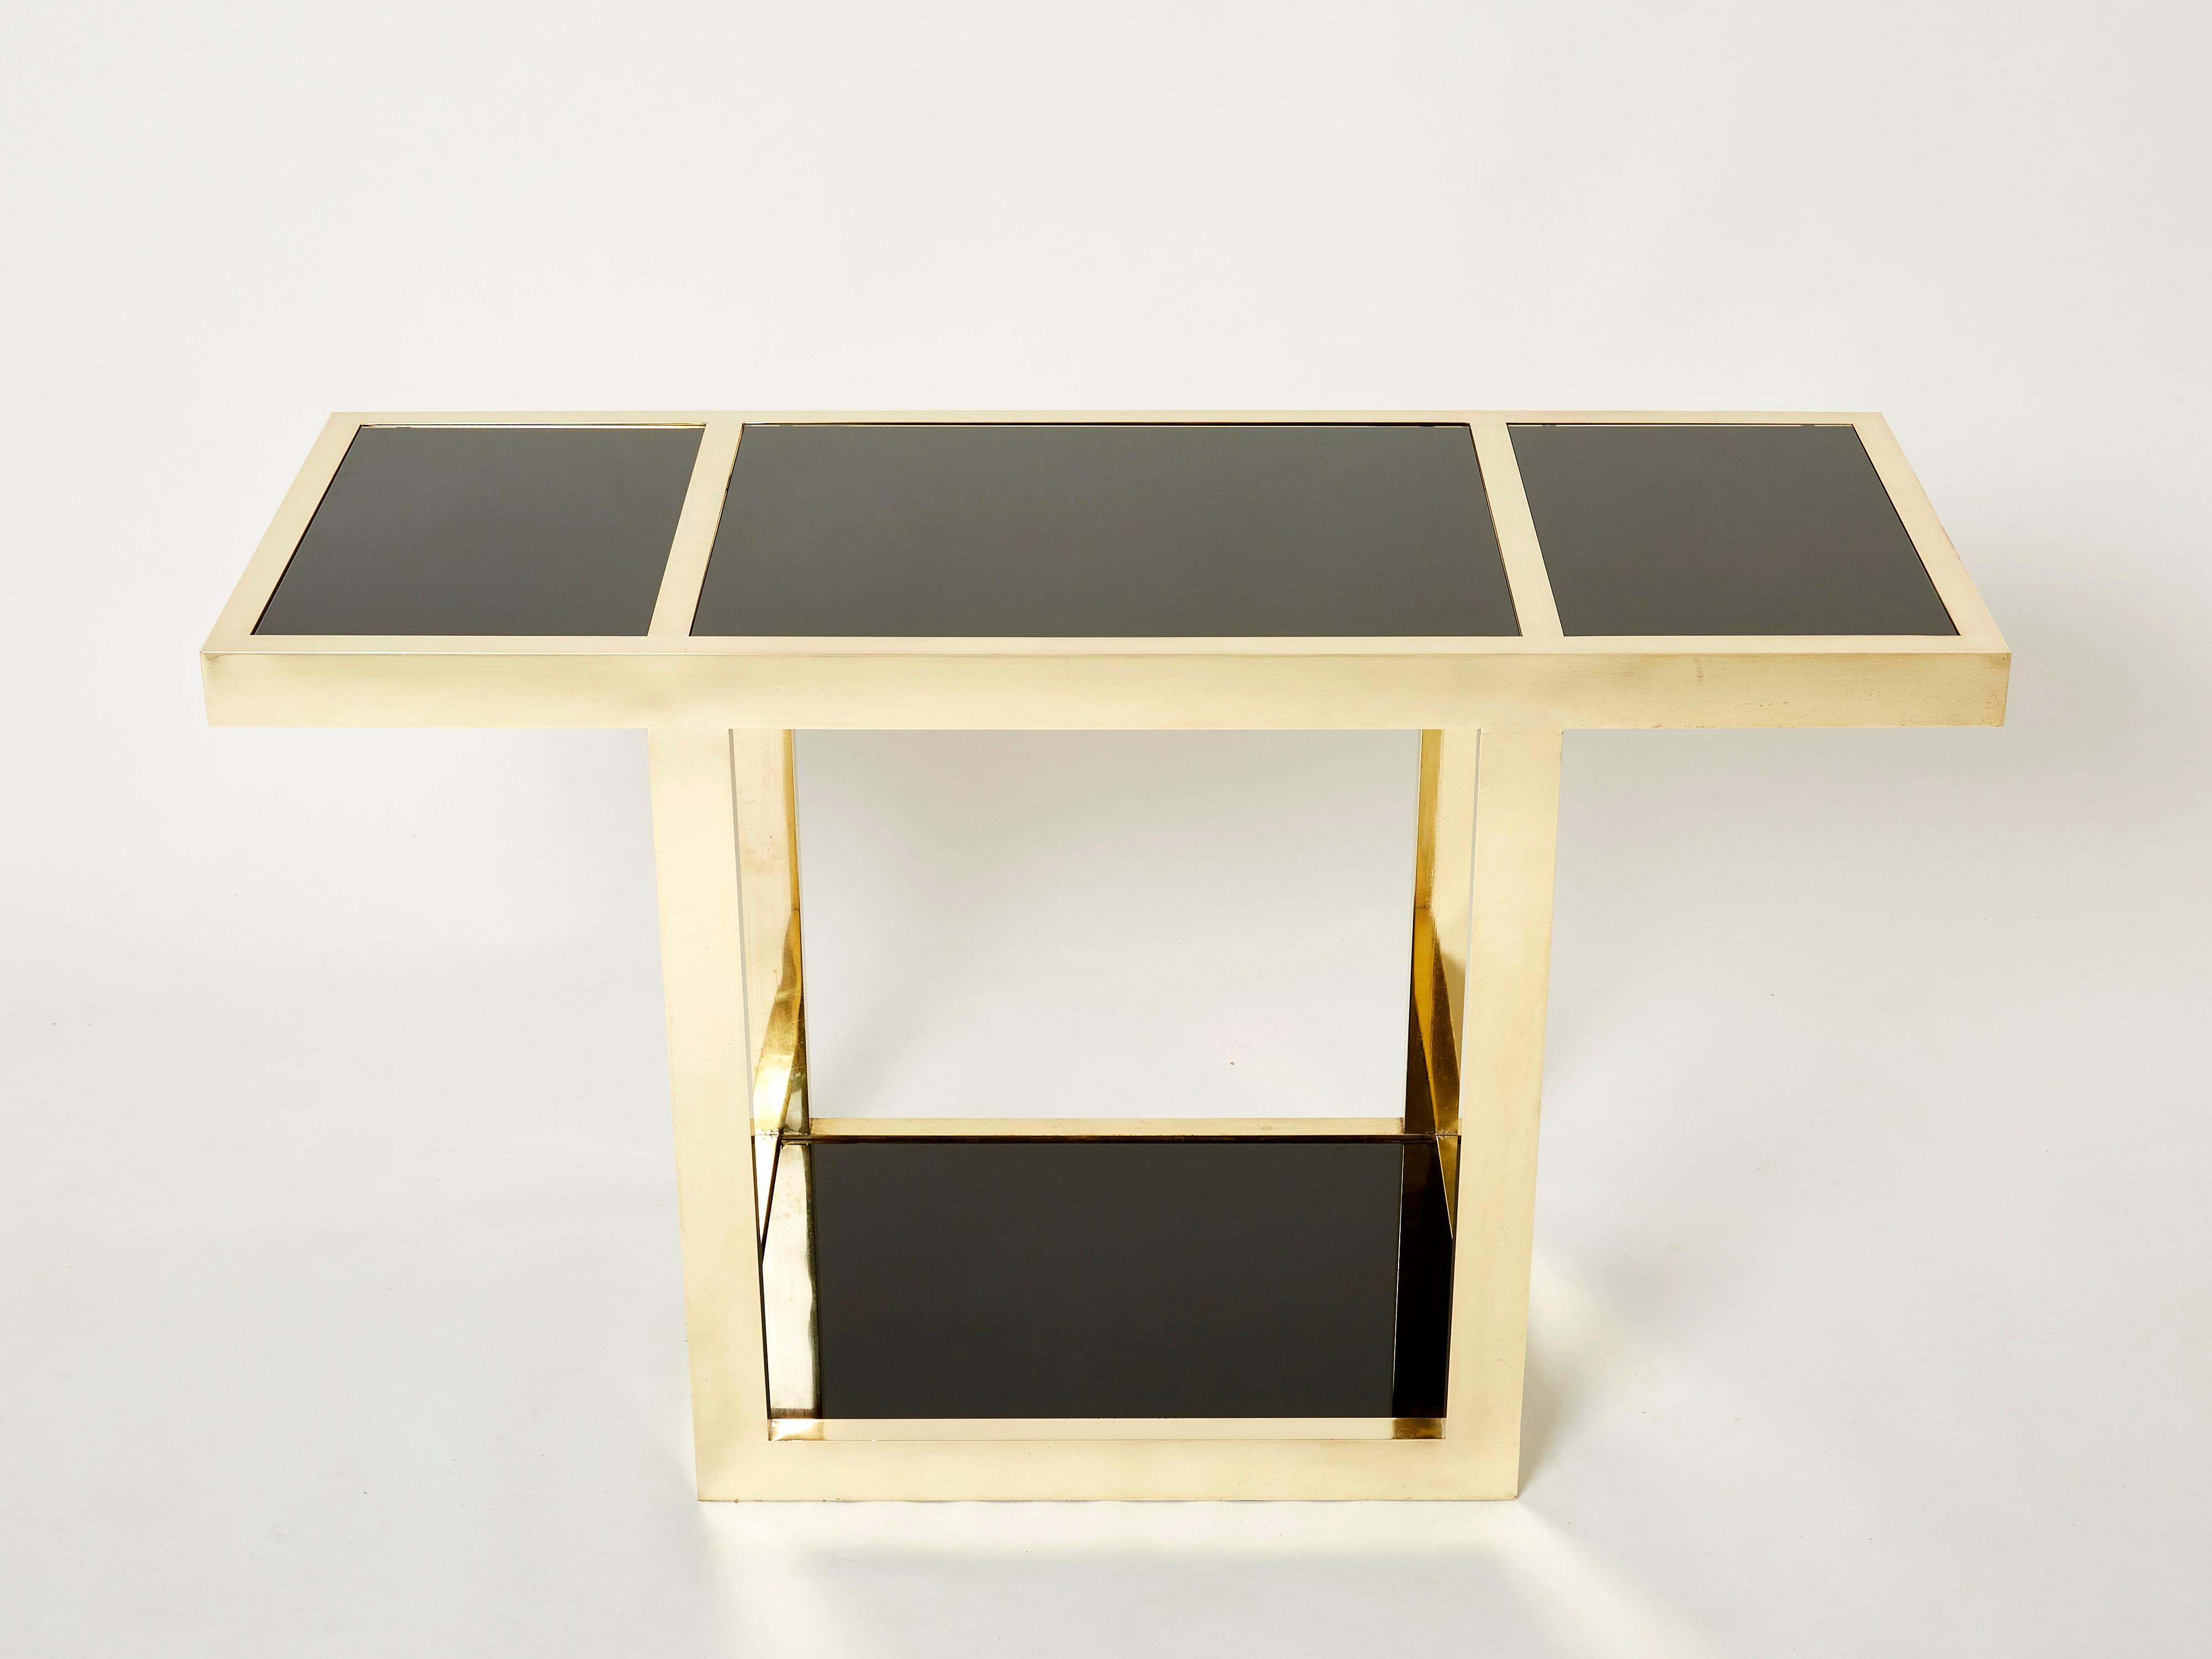 This beautiful thick brass and black opaline glass was made in Italy in the late 1970s. Symmetrical brass elements strike through black opaline glass tops, the result being an impressively sleek decorative piece. This console table deserves to be